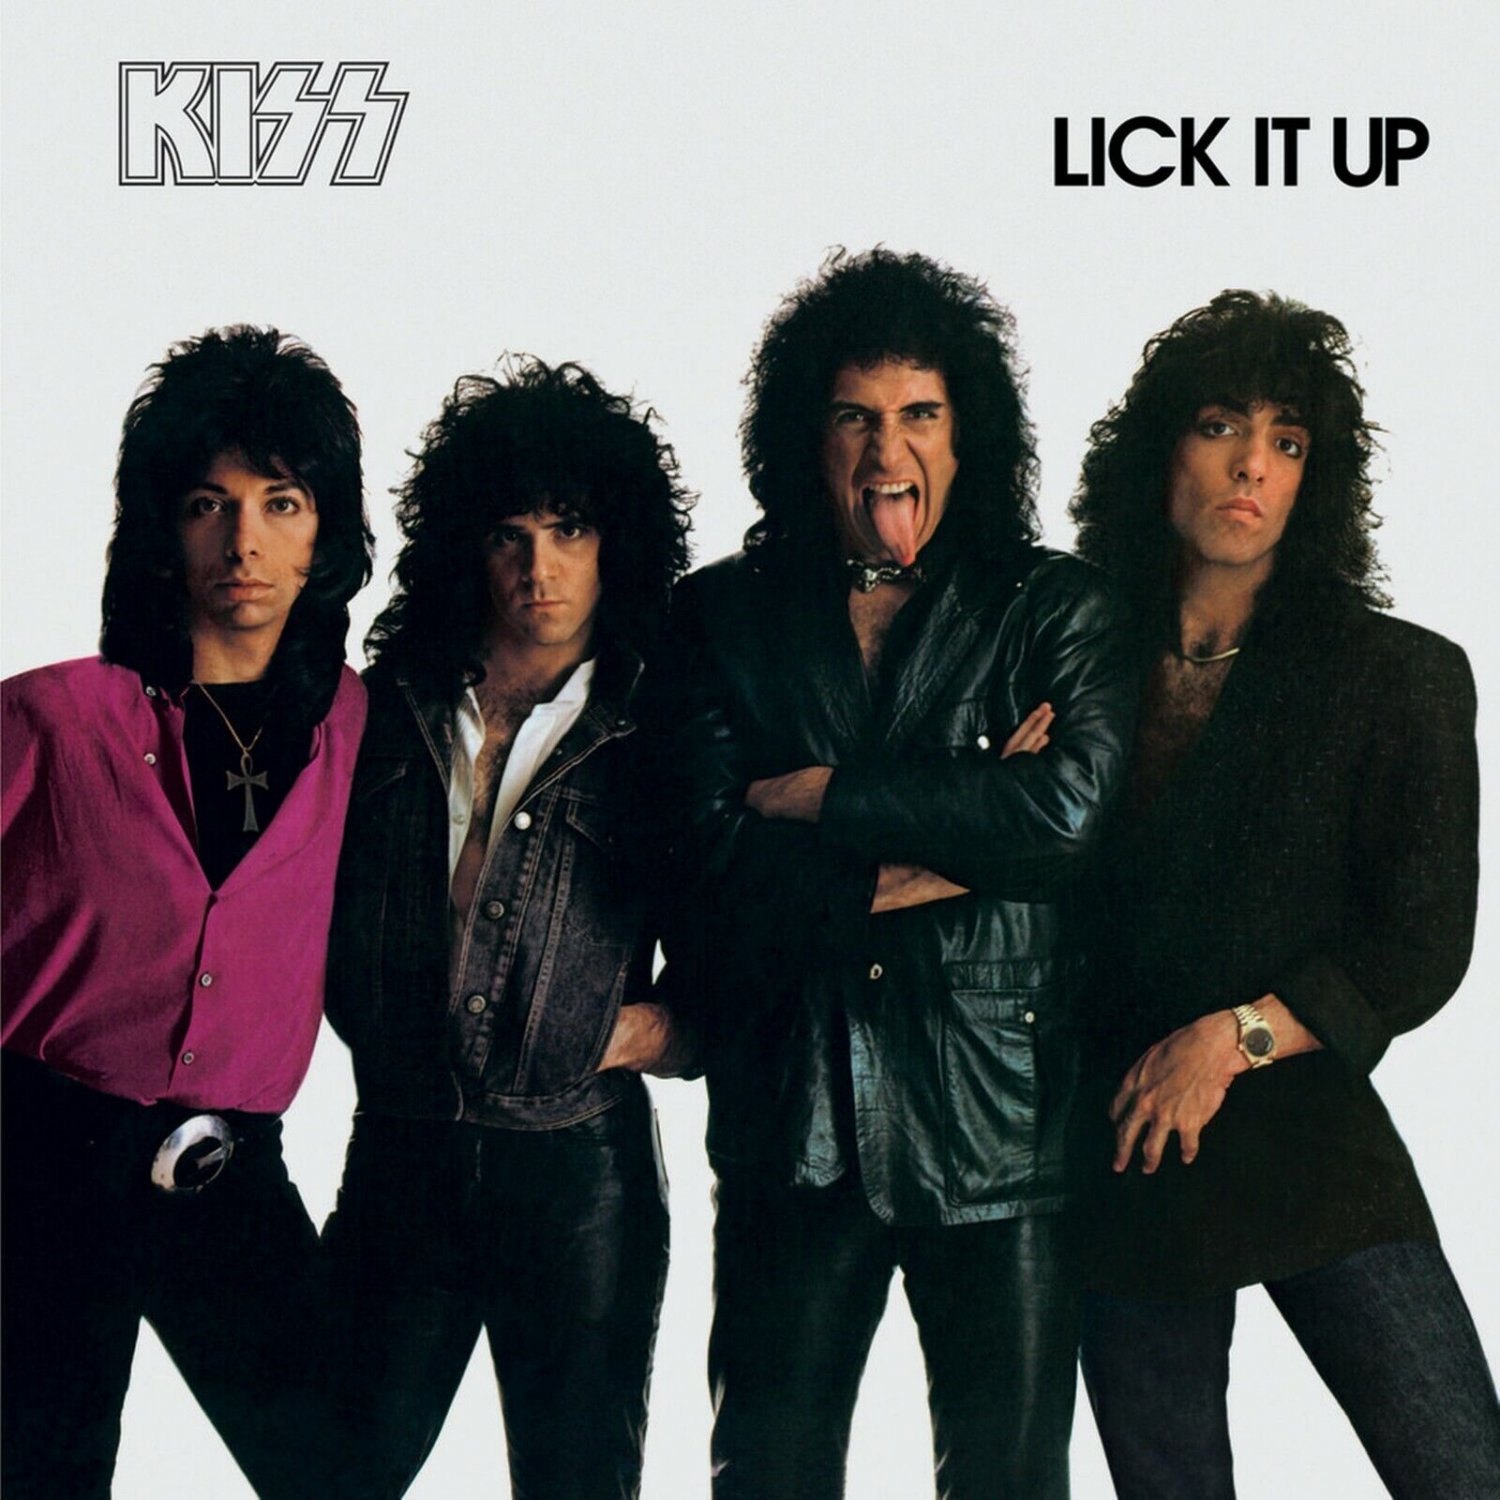 KISS Lick it Up BANNER HUGE 4X4 Ft Fabric Poster Tapestry Flag album cover art